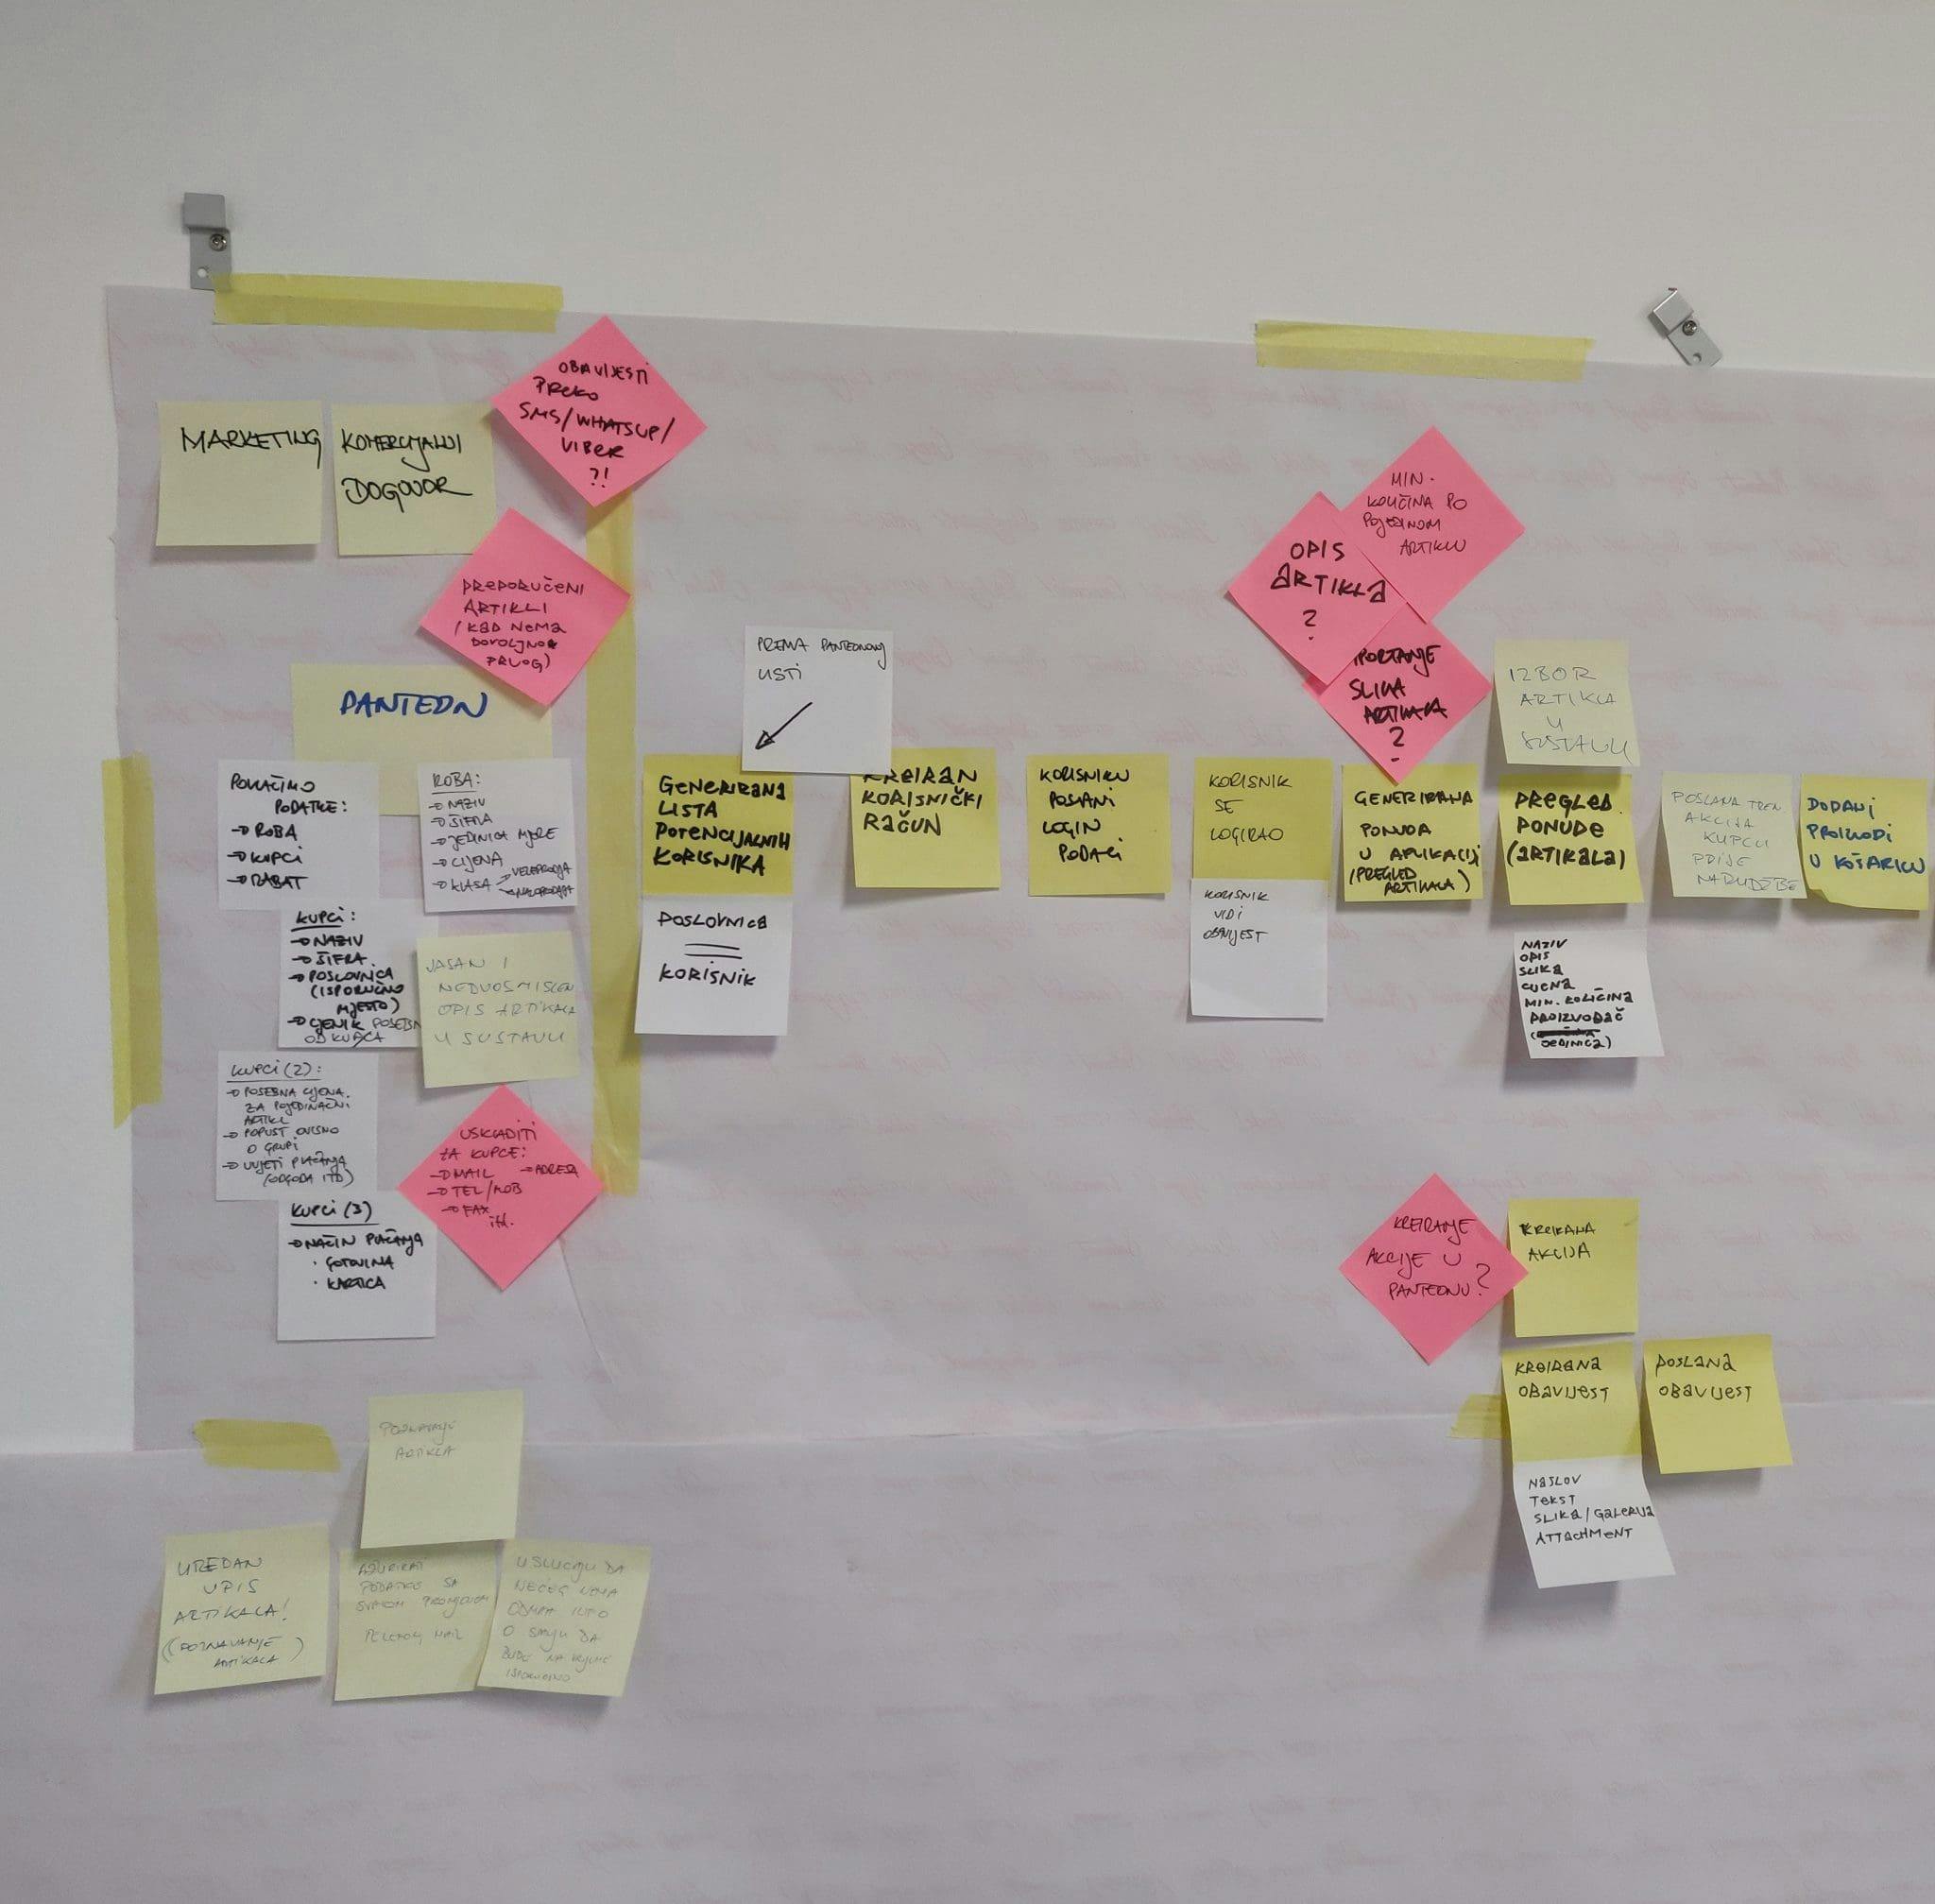 the-introduction-to-big-picture-eventstorming-v2